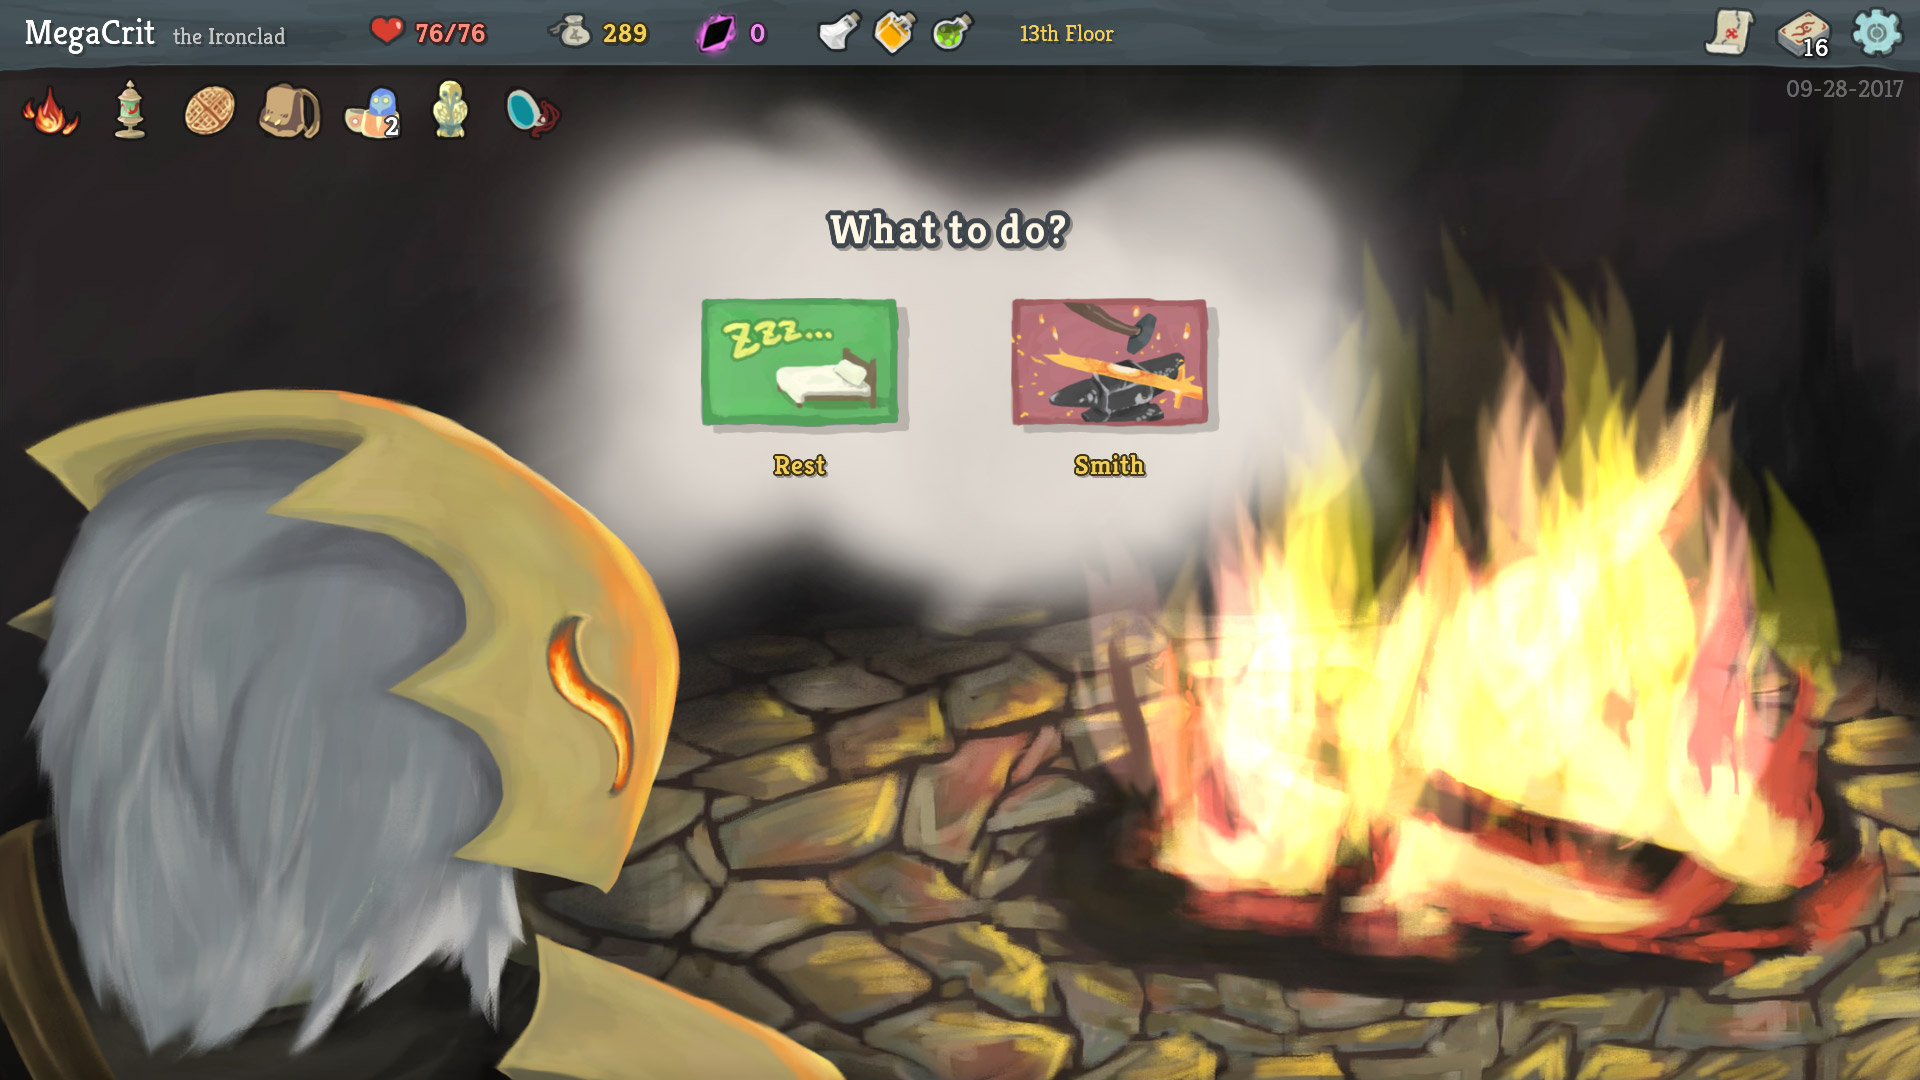 Rest or Smith? Slay the Spire Screenshot